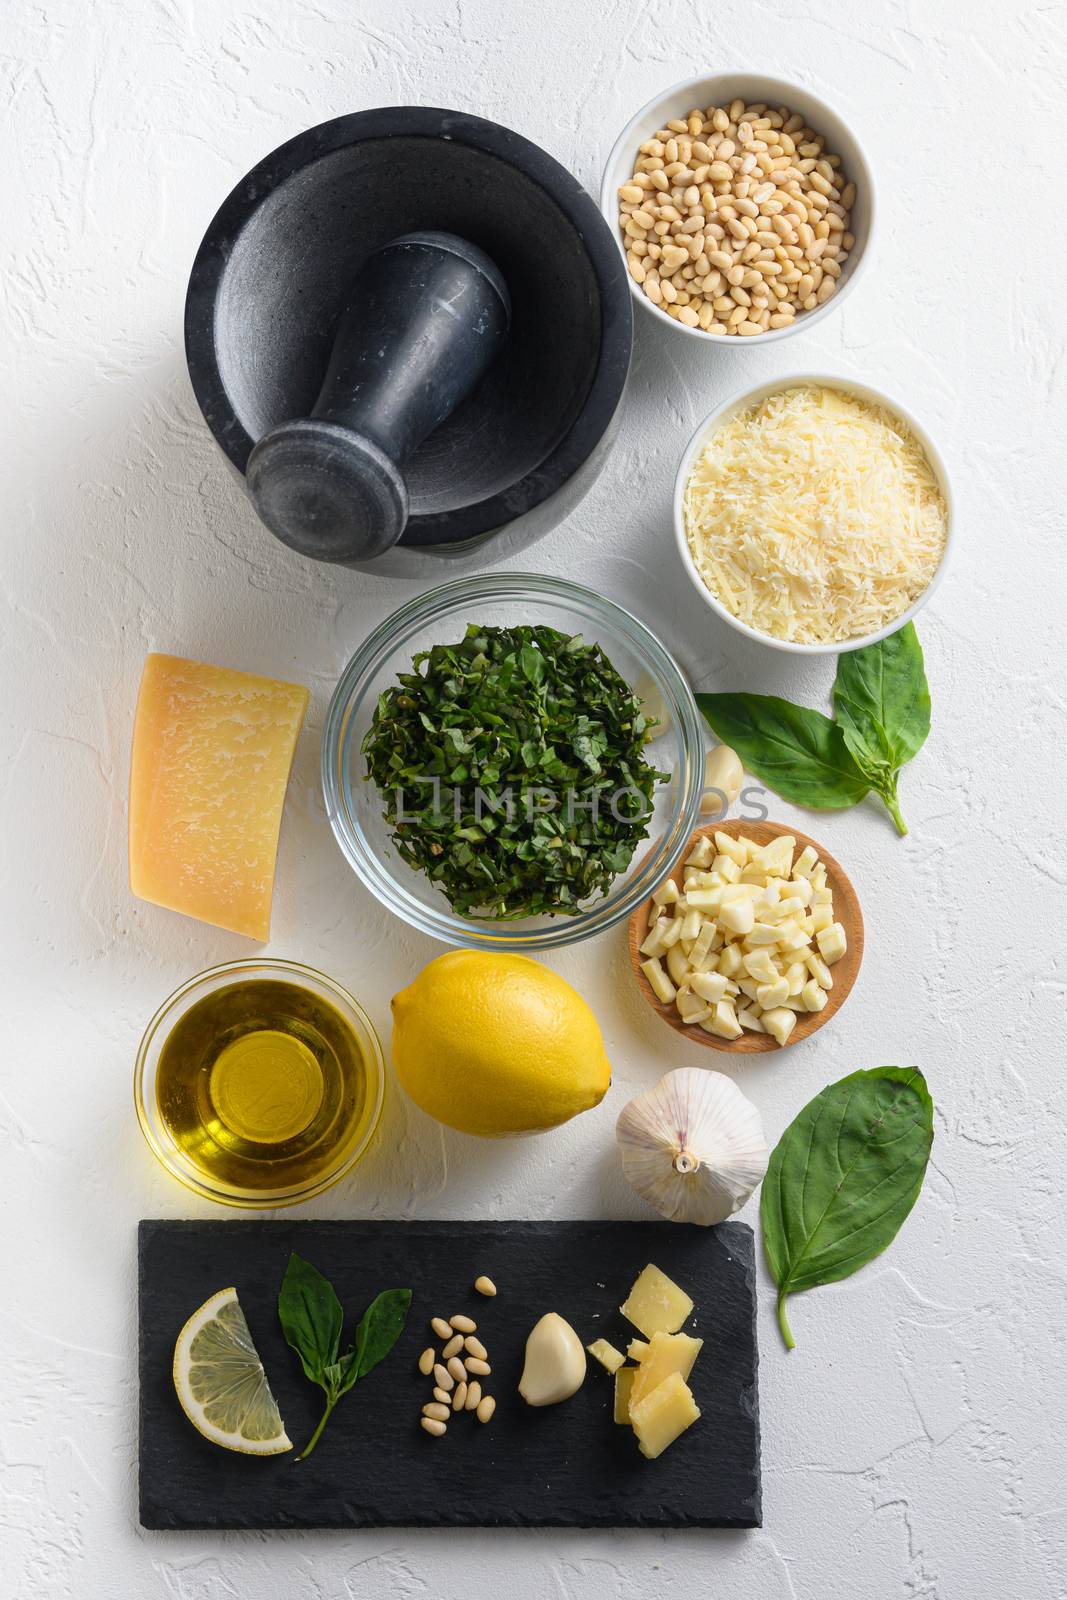 Pesto alla Genovese , Basil Sauce Different ingredients for Italian pesto. Grated parmesan cheese, basil leaves, pine nuts, olive oil, garlic On the white stone slate side top view. by Ilianesolenyi